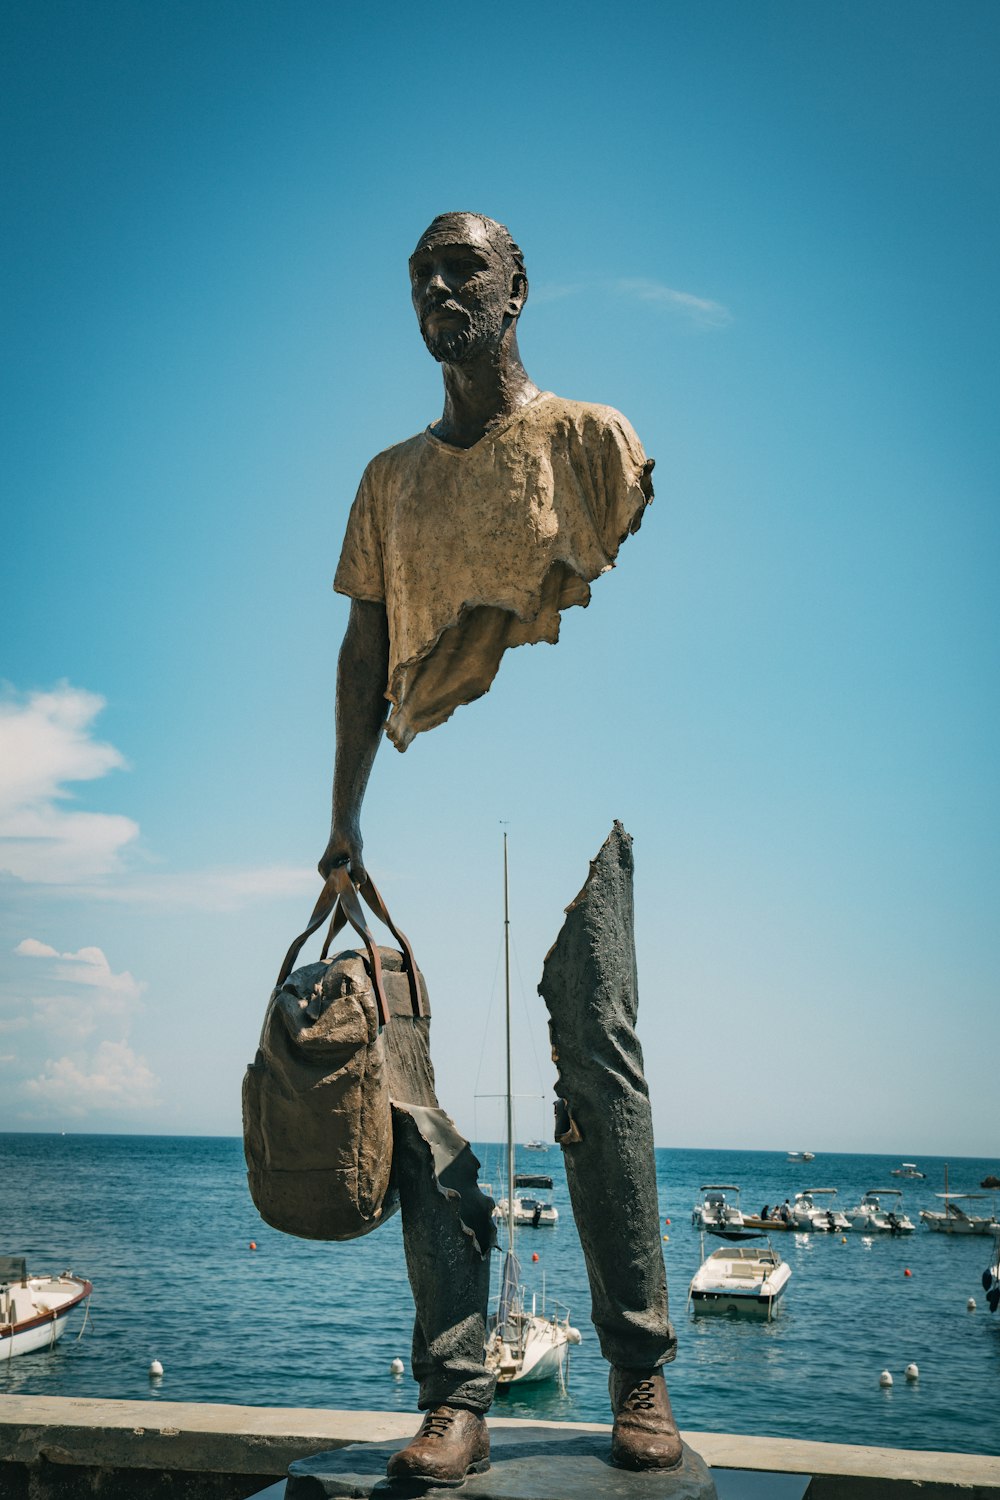 a statue of a man holding a bag near a body of water